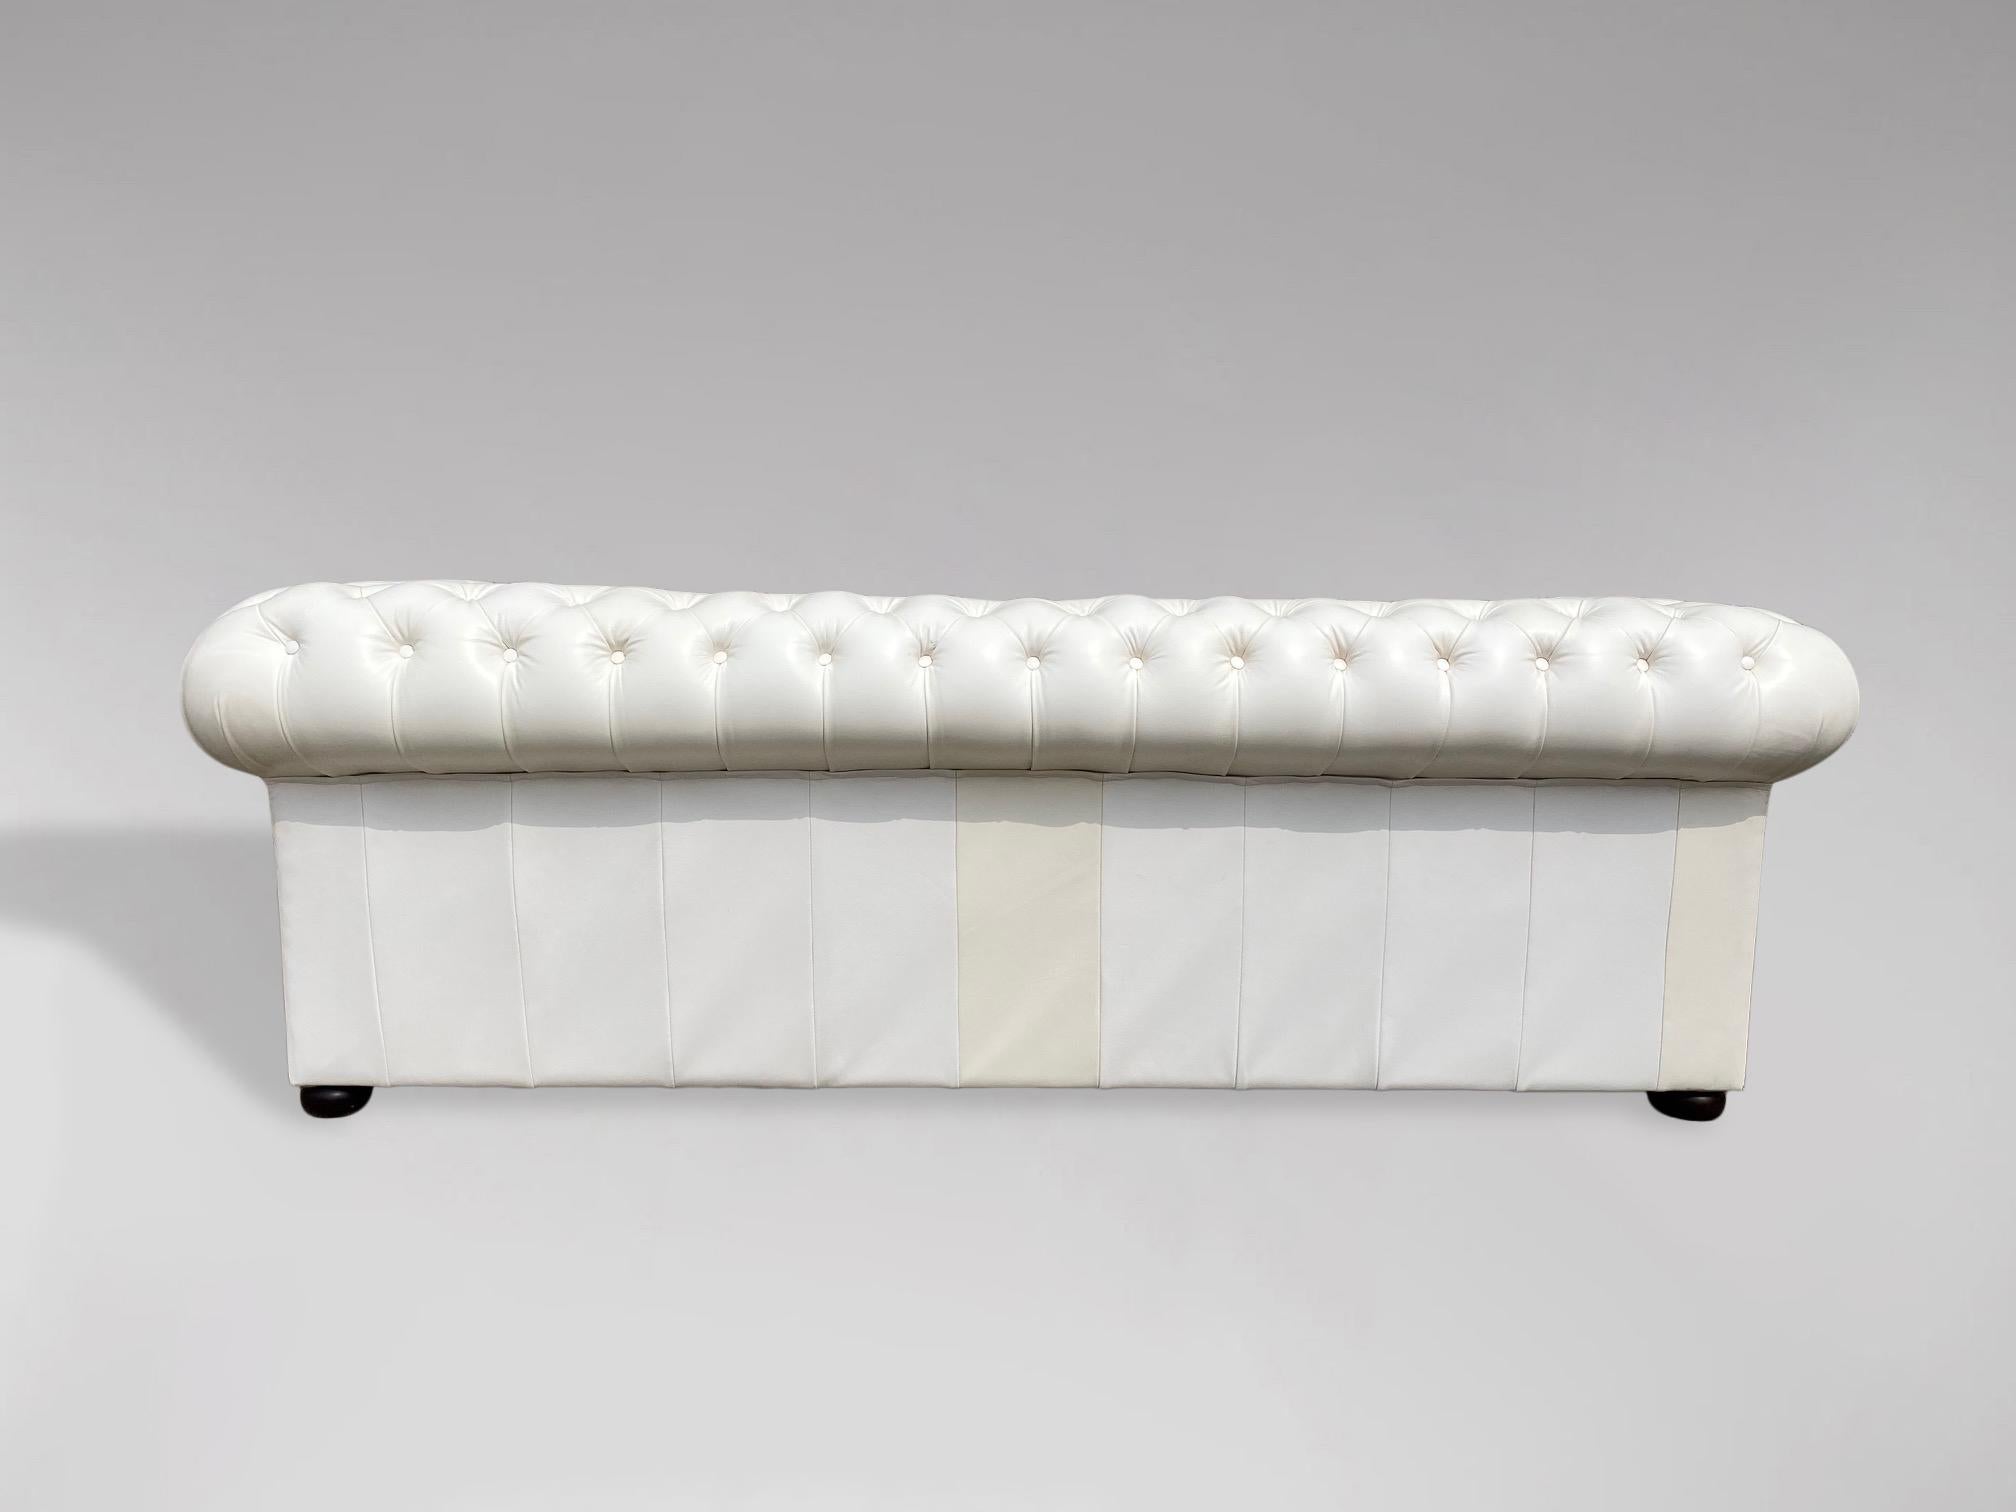 Hand-Crafted 20th Century Three Seater White Leather Chesterfield Sofa For Sale